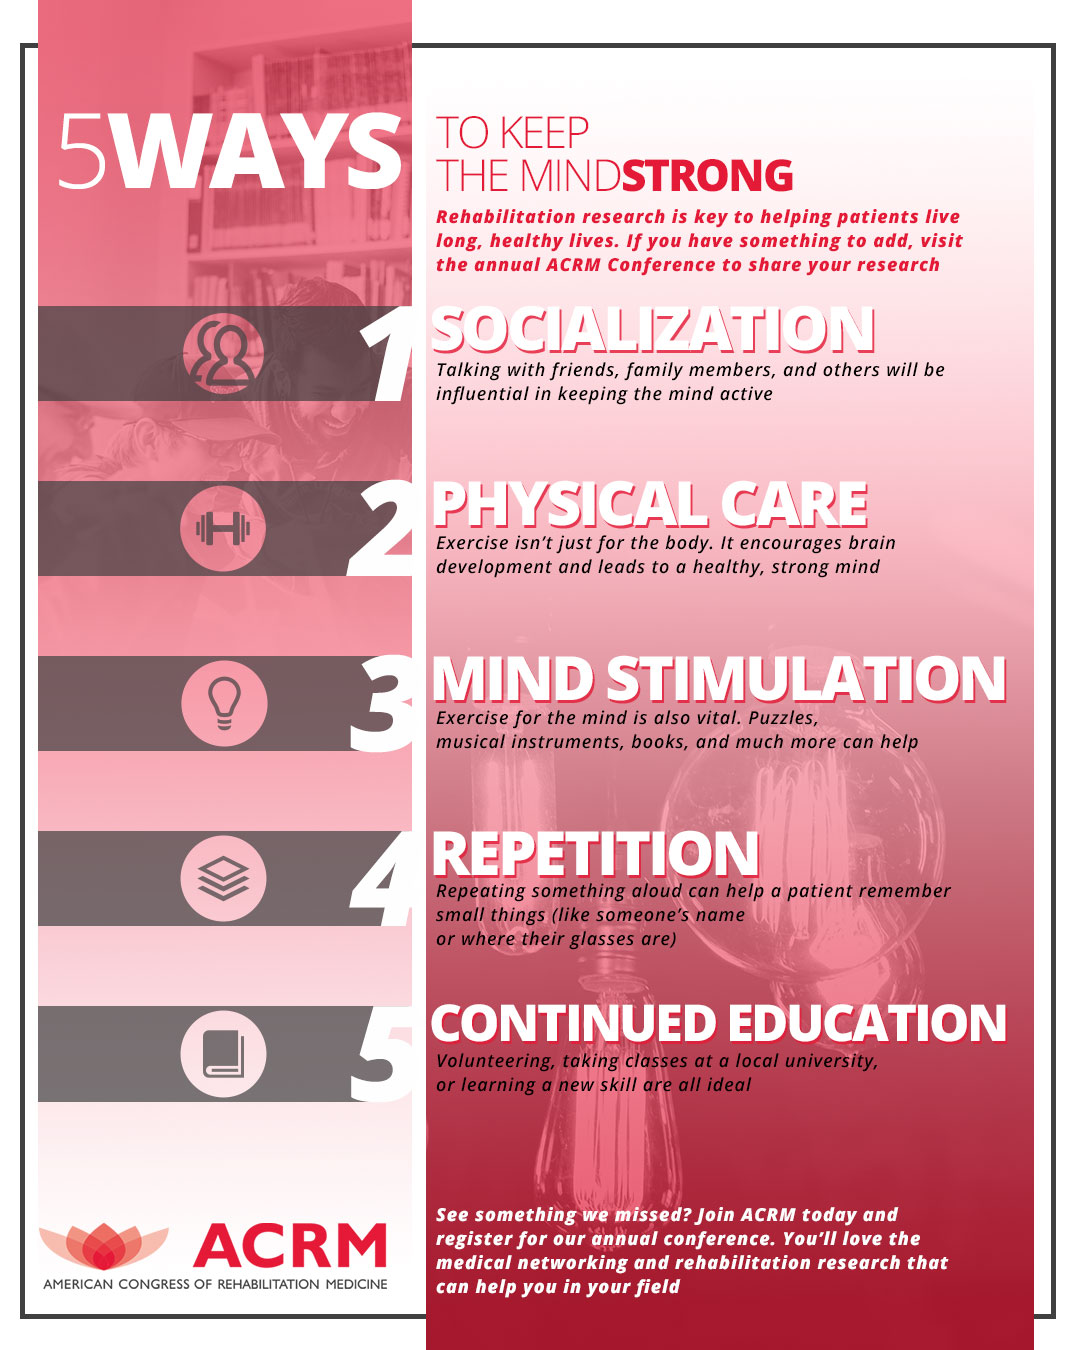 Rehabilitation Research: 5 Ways To Help Keep The Mind Strong